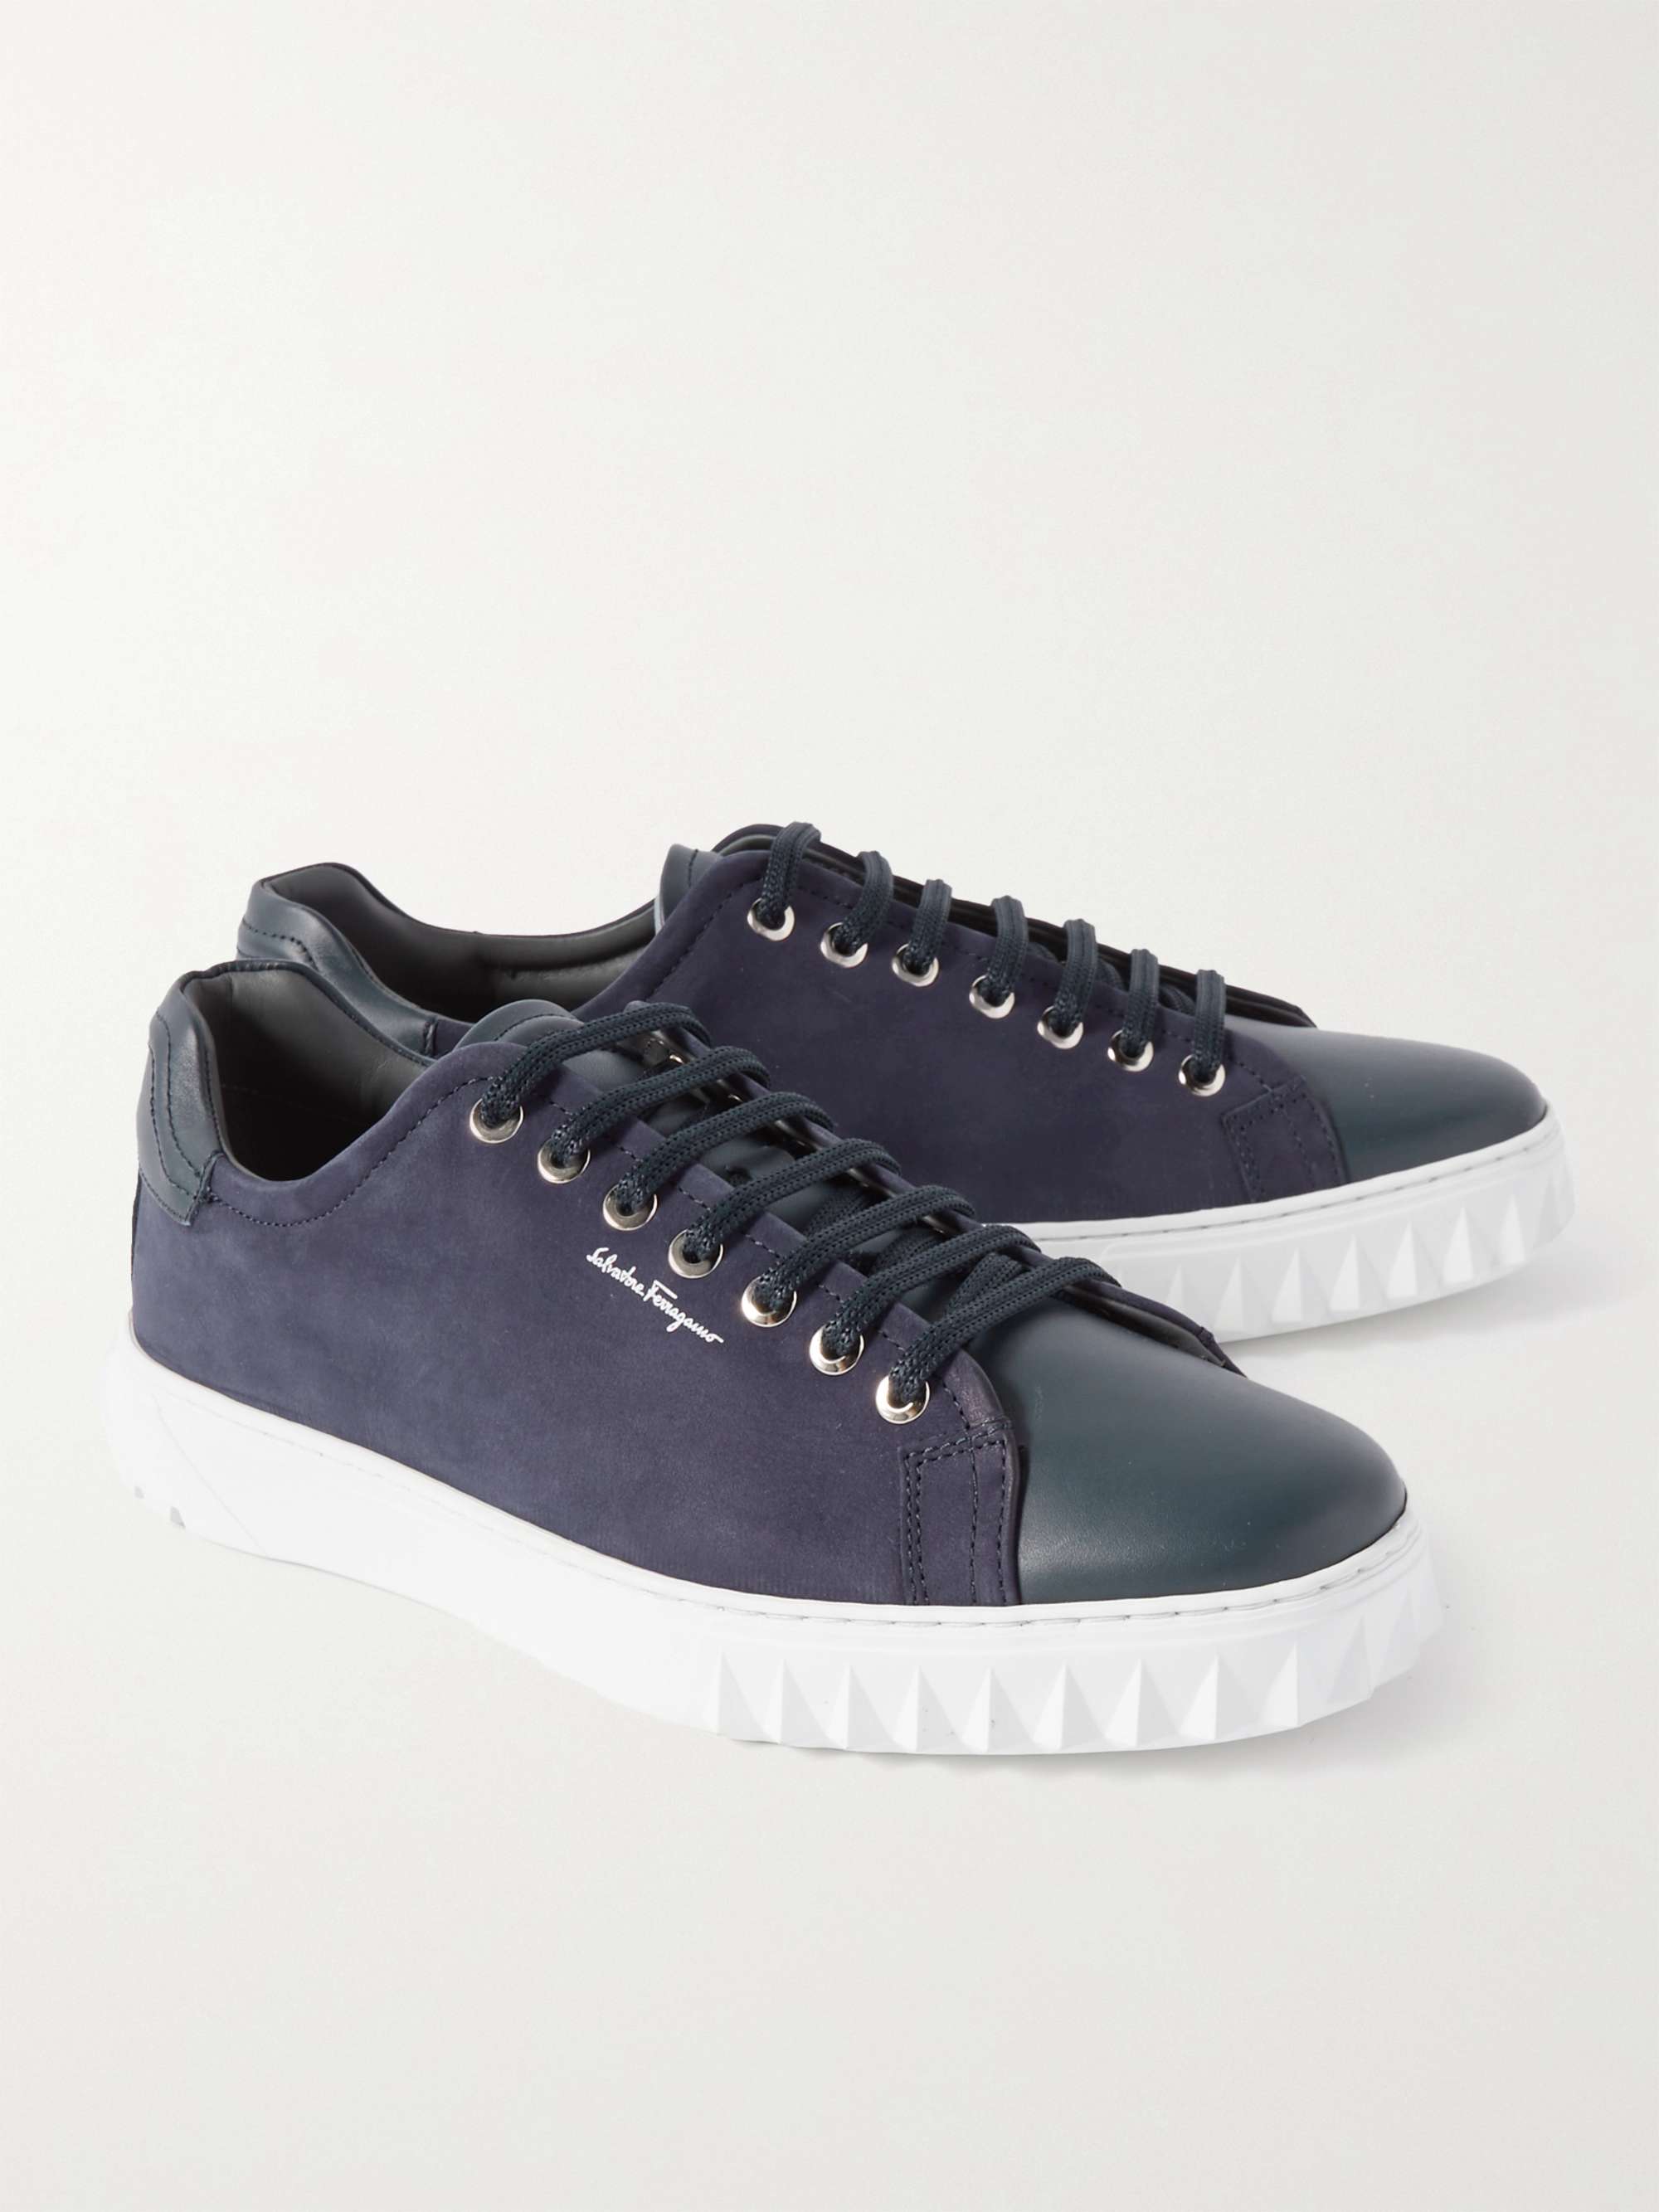 FERRAGAMO Cube Leather and Suede Sneakers for Men | MR PORTER